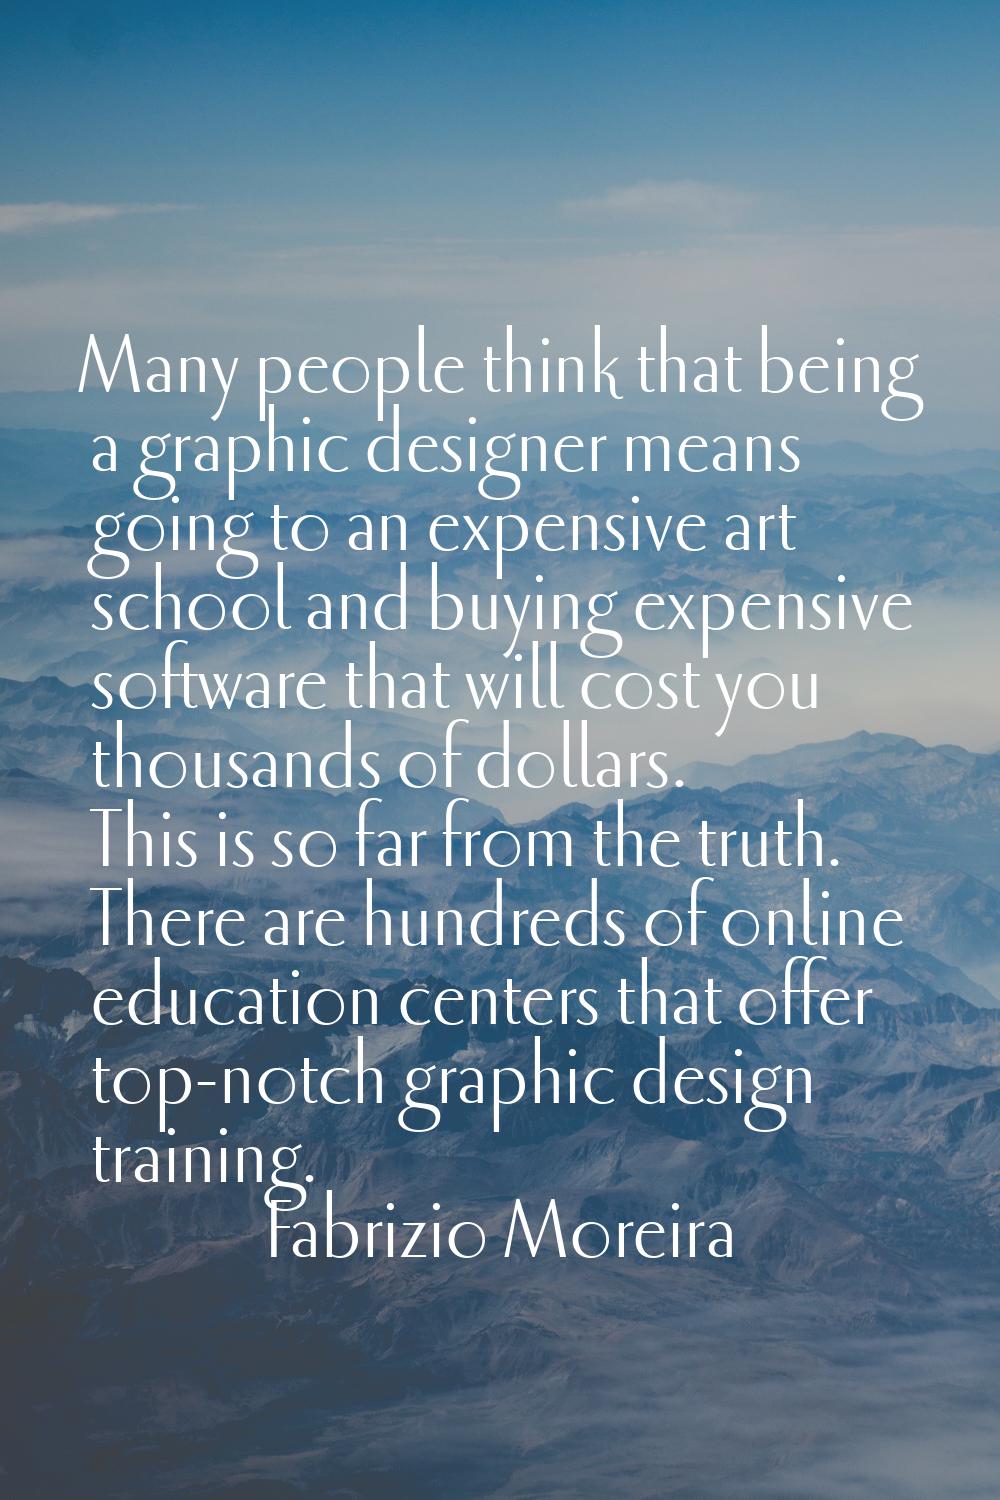 Many people think that being a graphic designer means going to an expensive art school and buying e